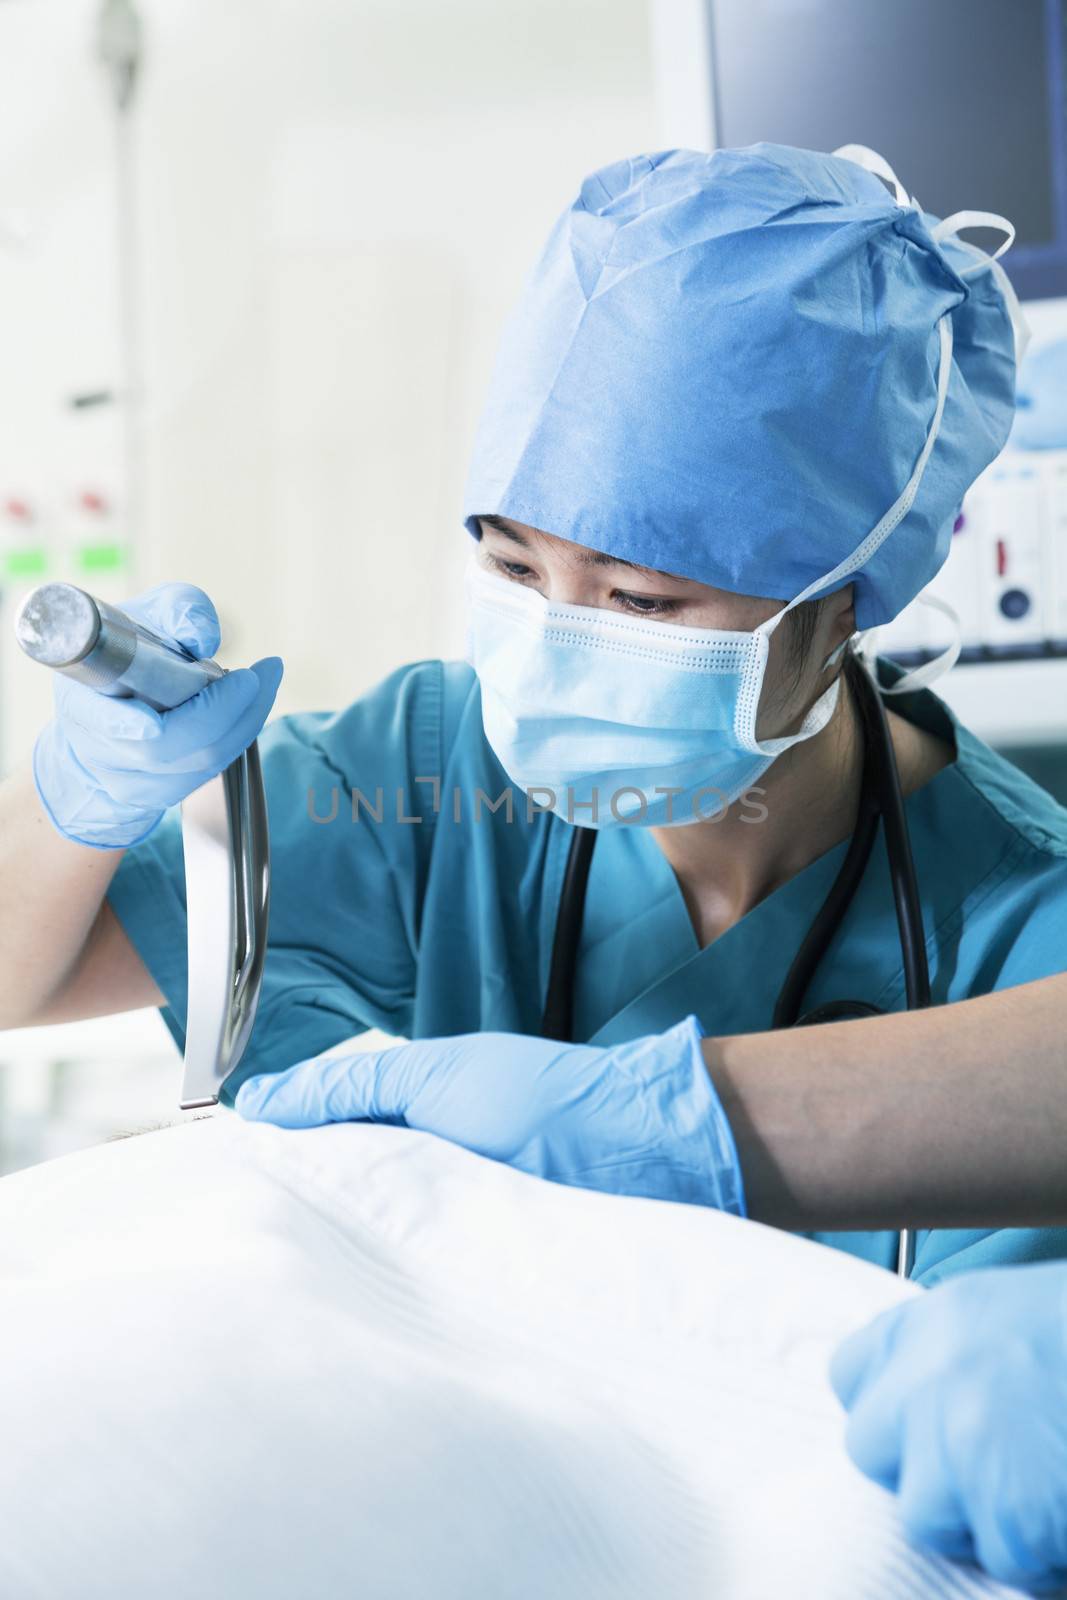 Surgeon looking down and holding surgical equipment in the operating room, close-up by XiXinXing